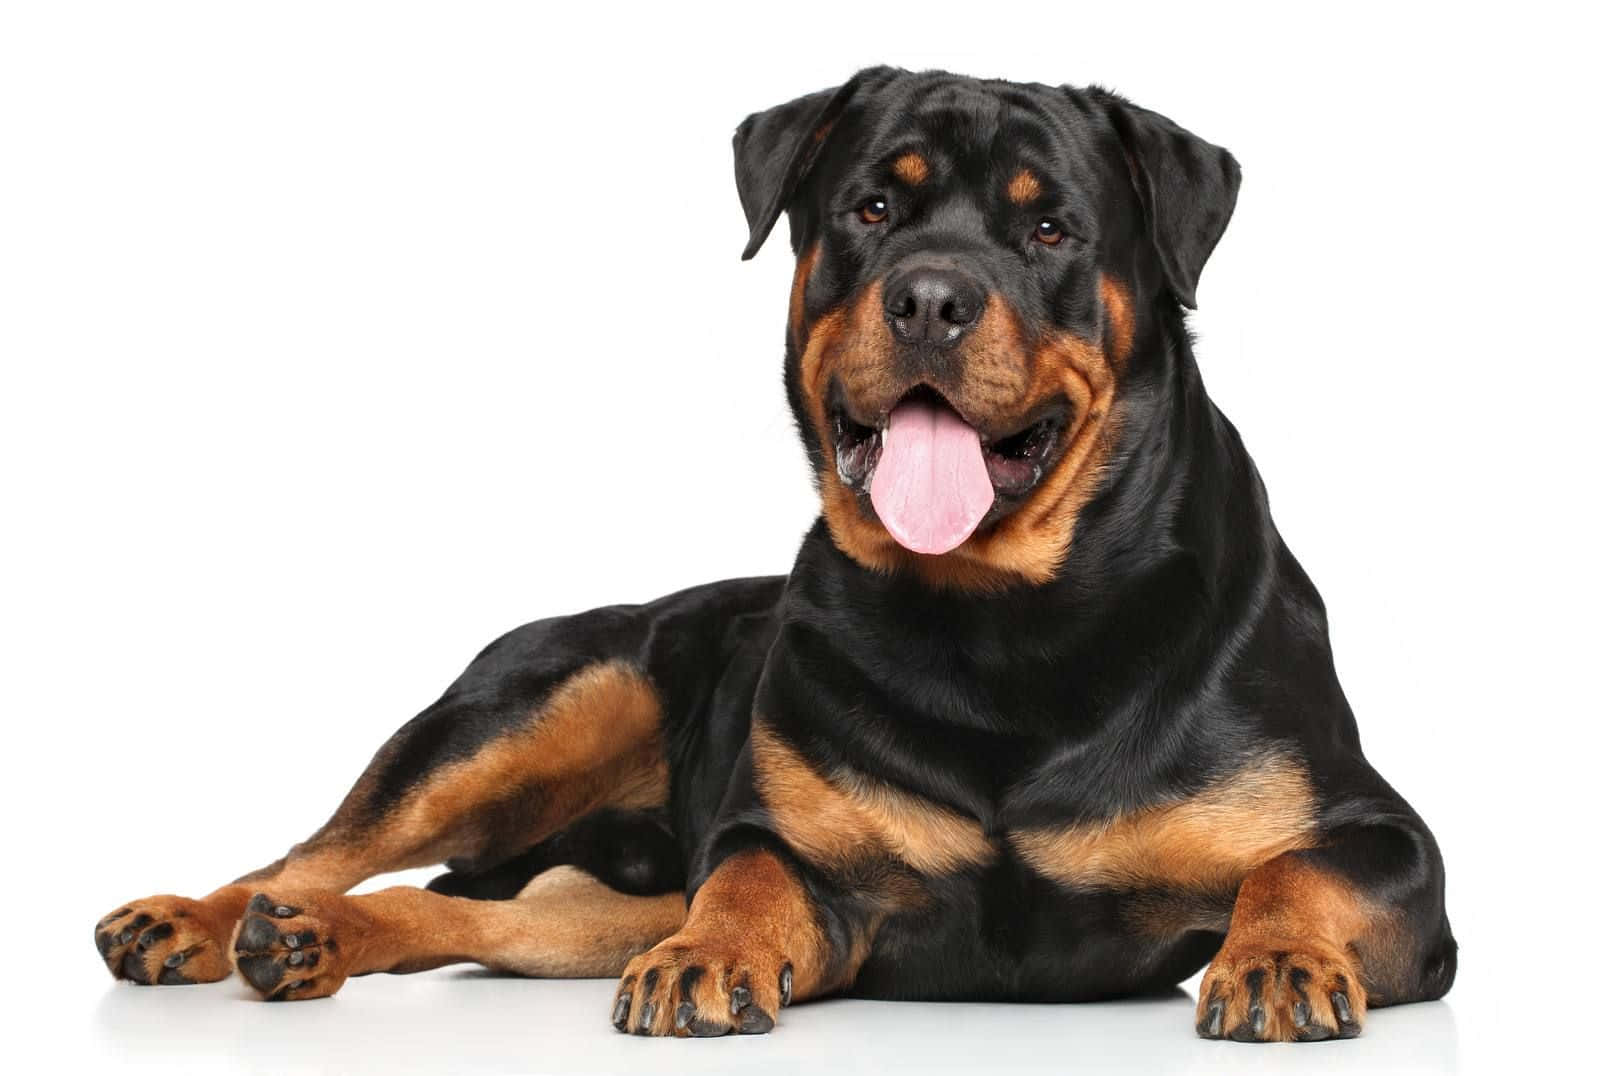 Rottweiler Dog Laying Down On White Background